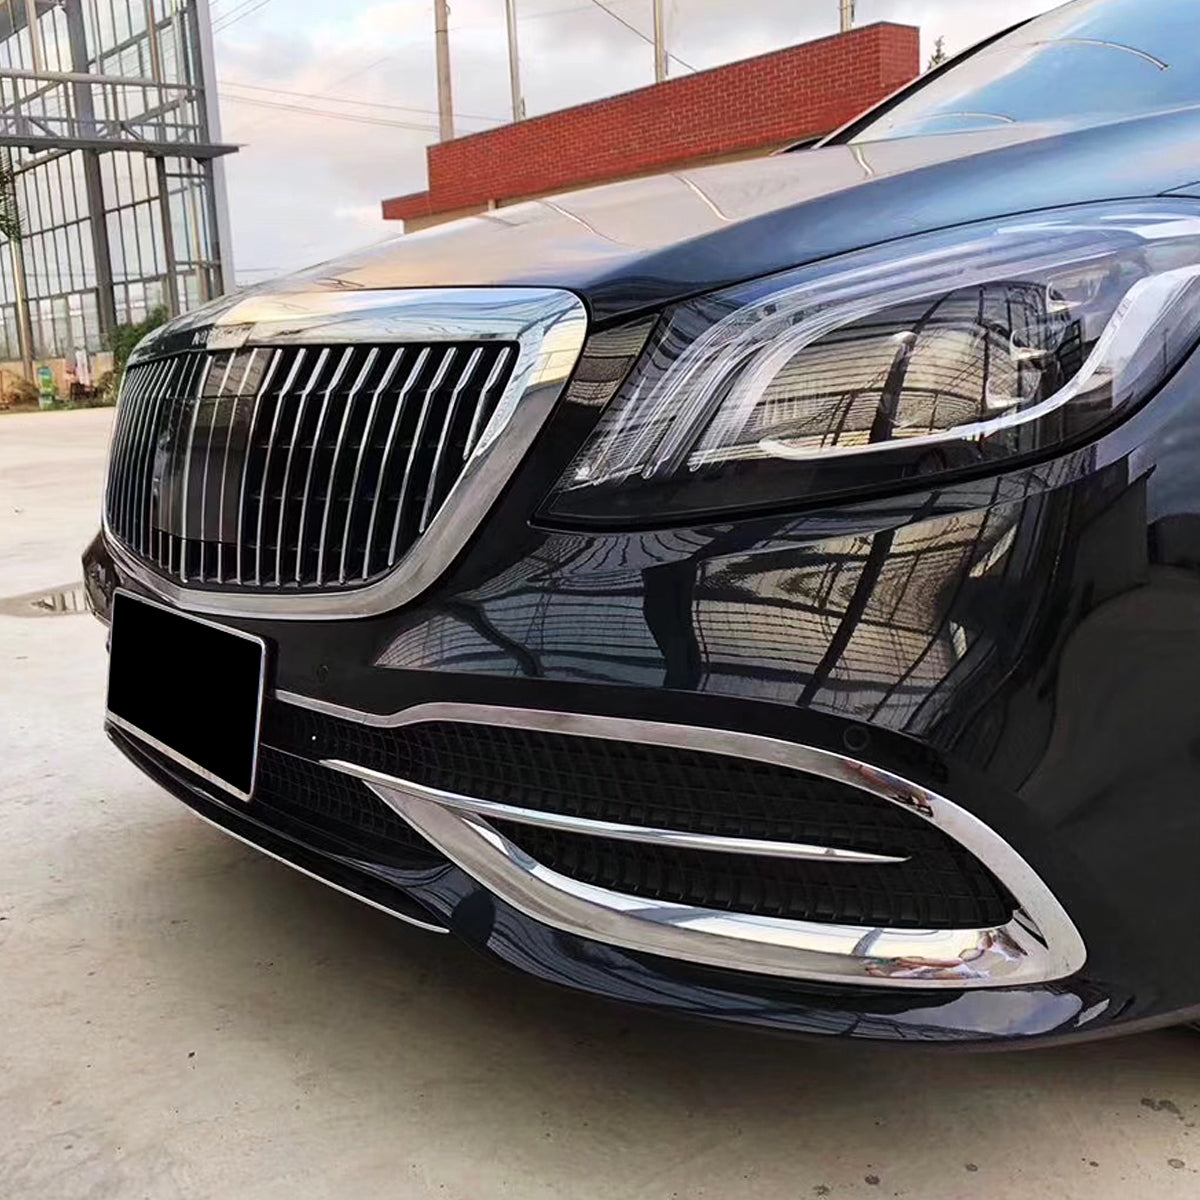 THE BODY KIT FOR W222 2014-2018 UPGRADE TO W222 MAYBACH STYLE WITH HEADLIGHT AND TAILLIGHT